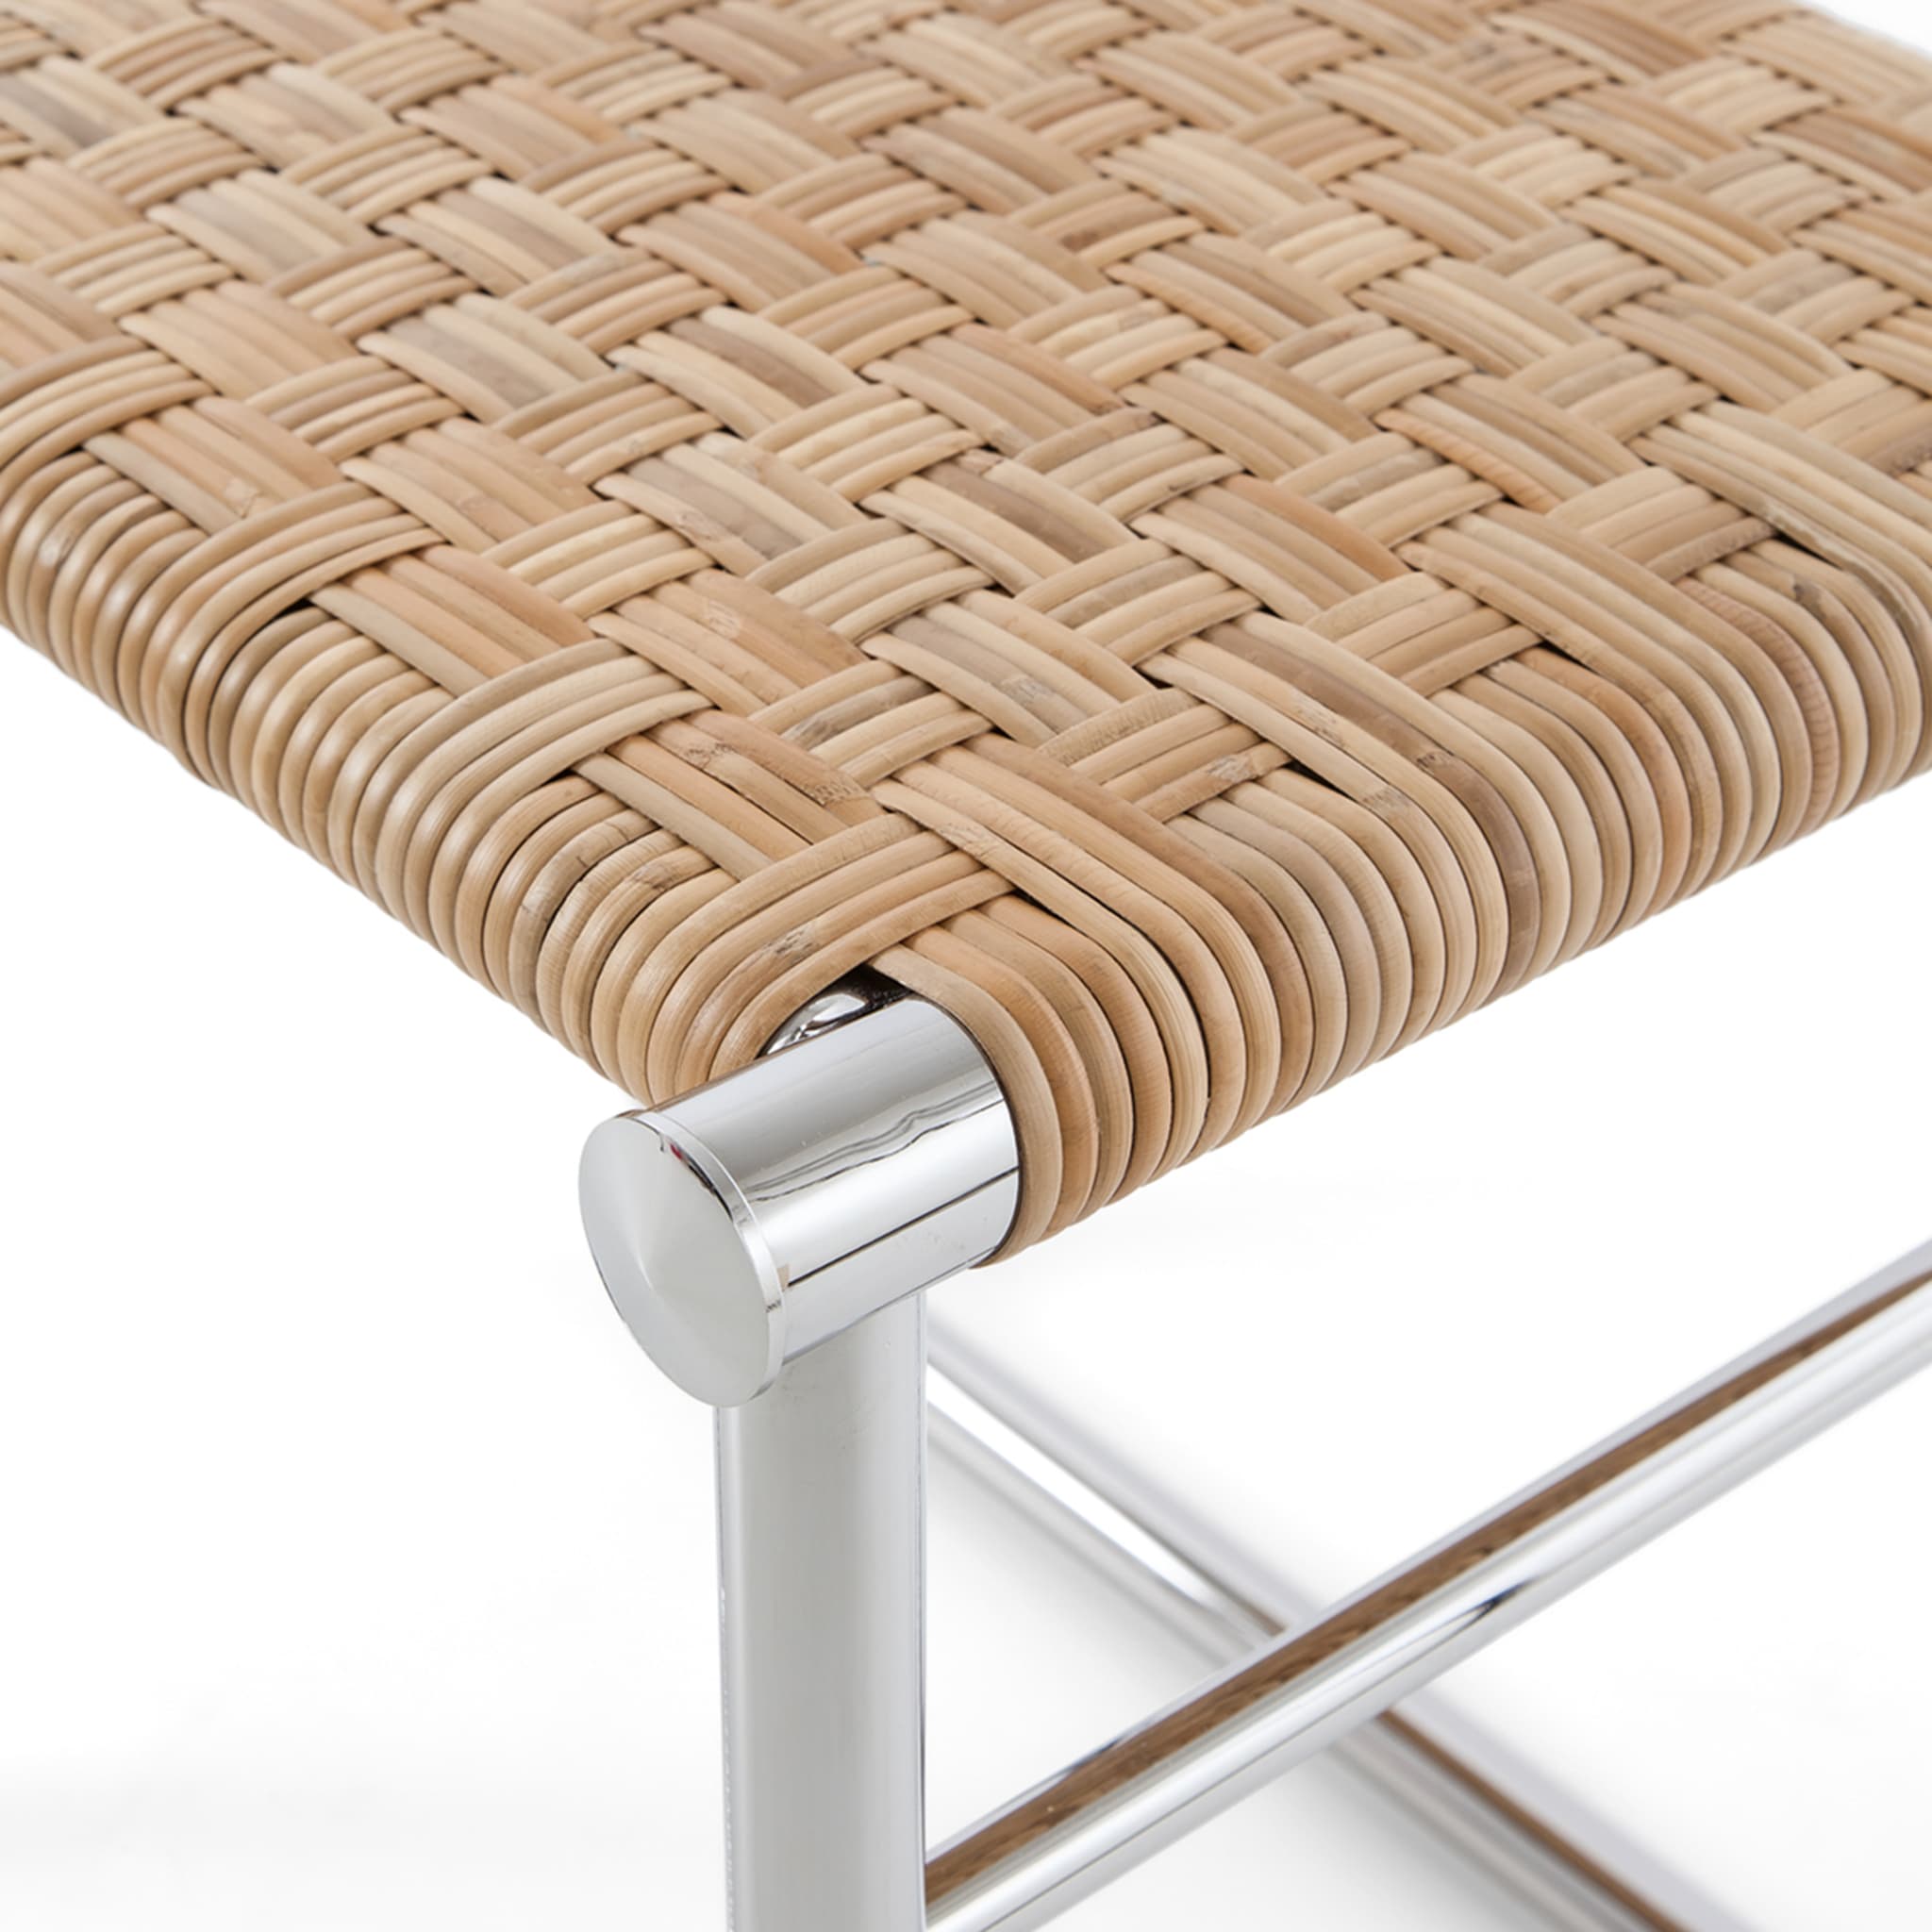 9 Tabouret By Charlotte Perriand - Rattan - Alternative view 3